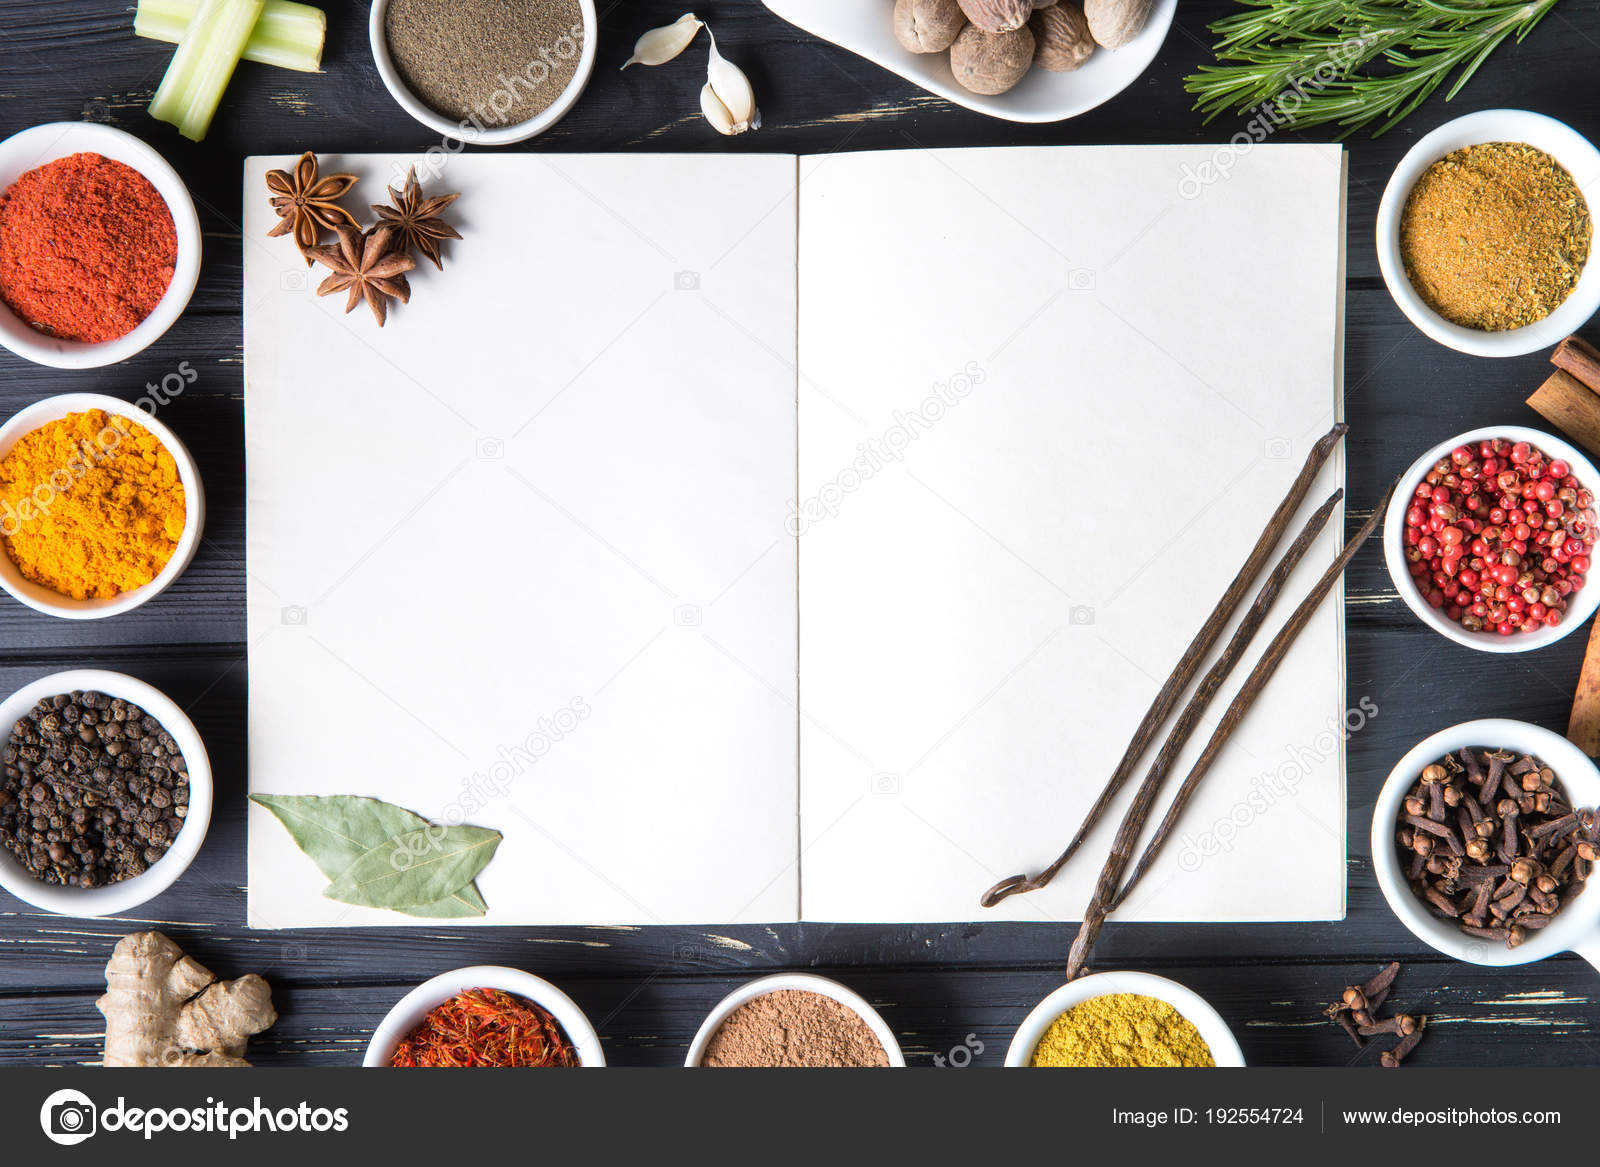 Herbs and Spices Recipe Binder